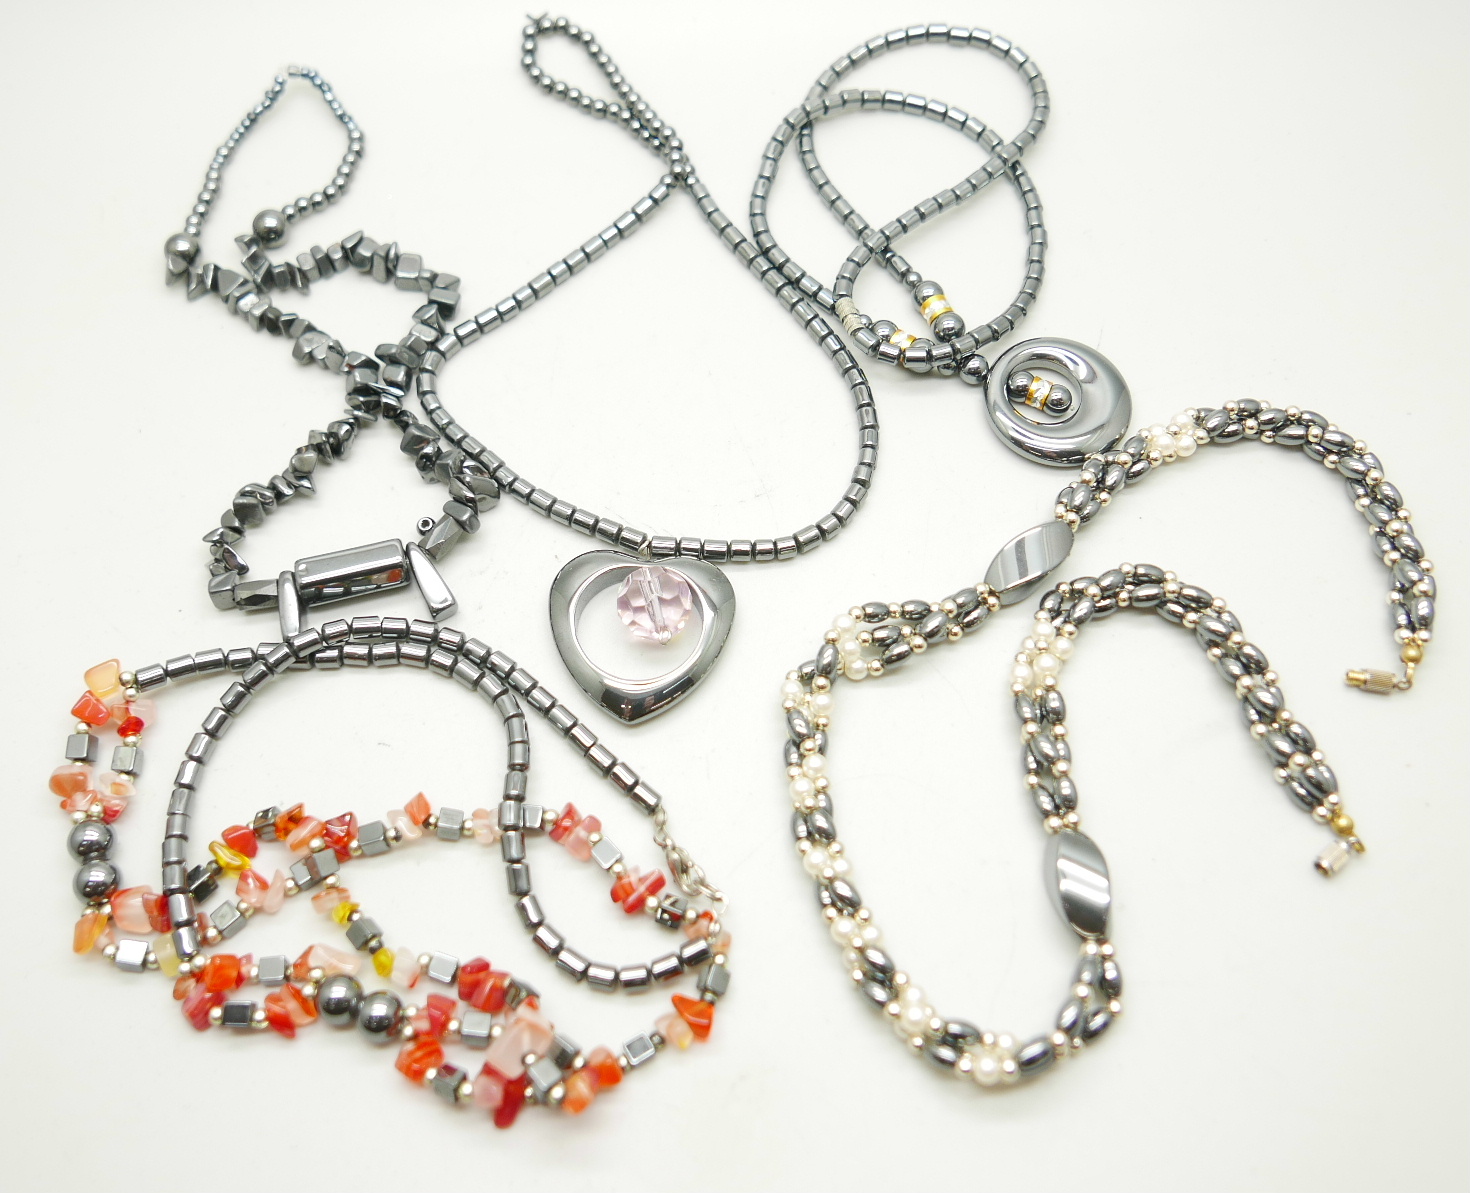 Five hematite and agate necklaces